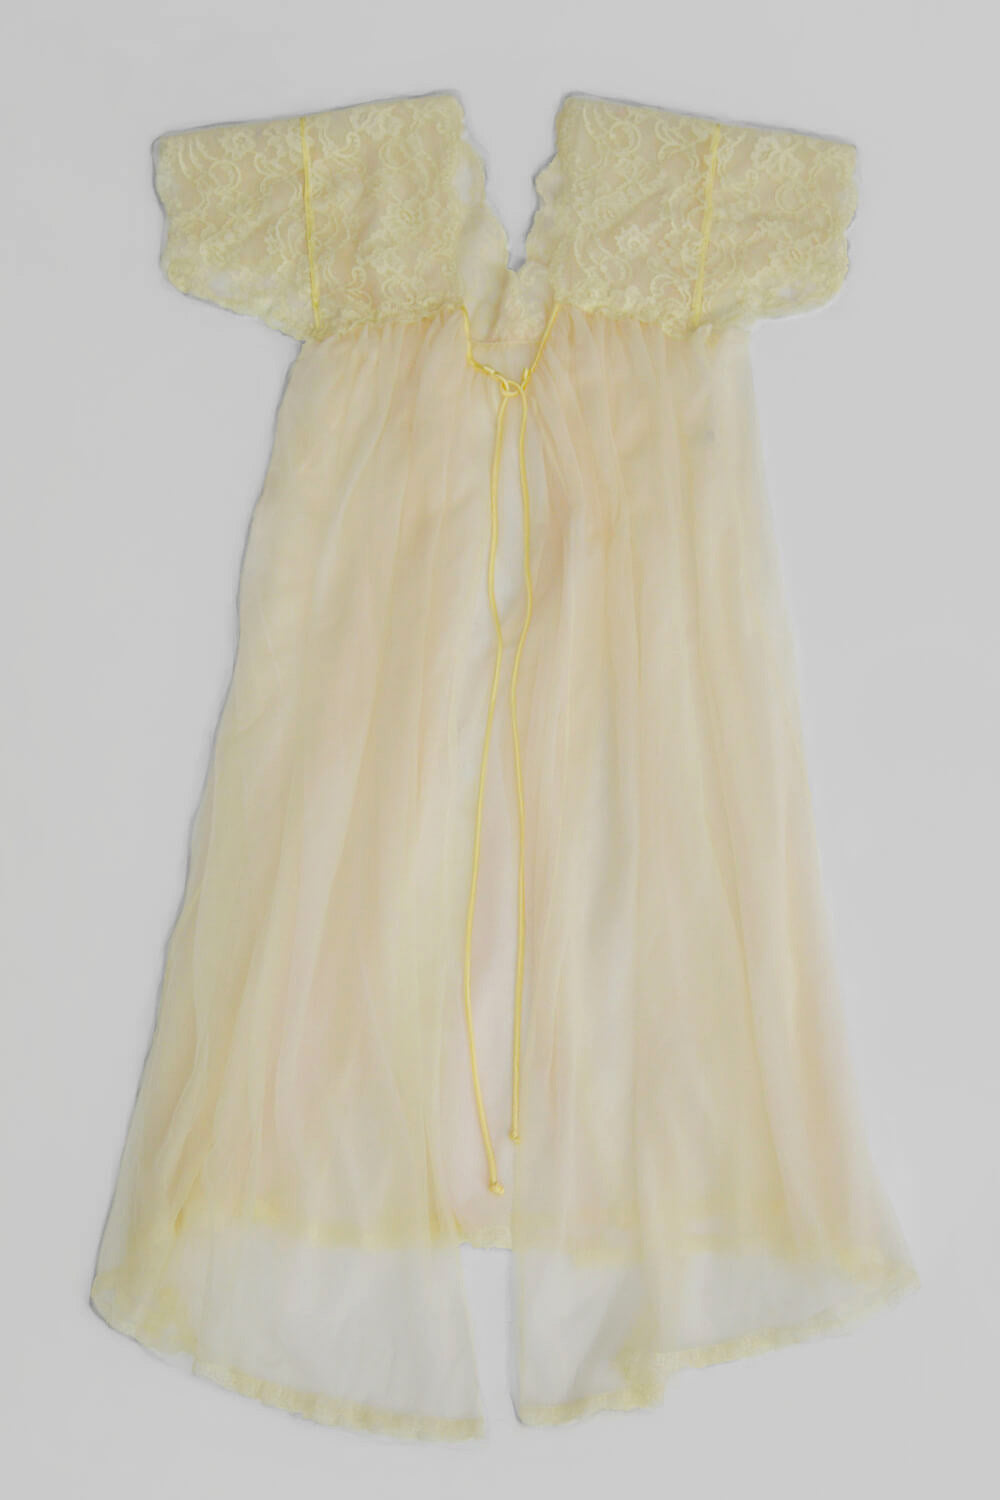 vintage 1950s sheer dressing gown - pale yellow - size 36